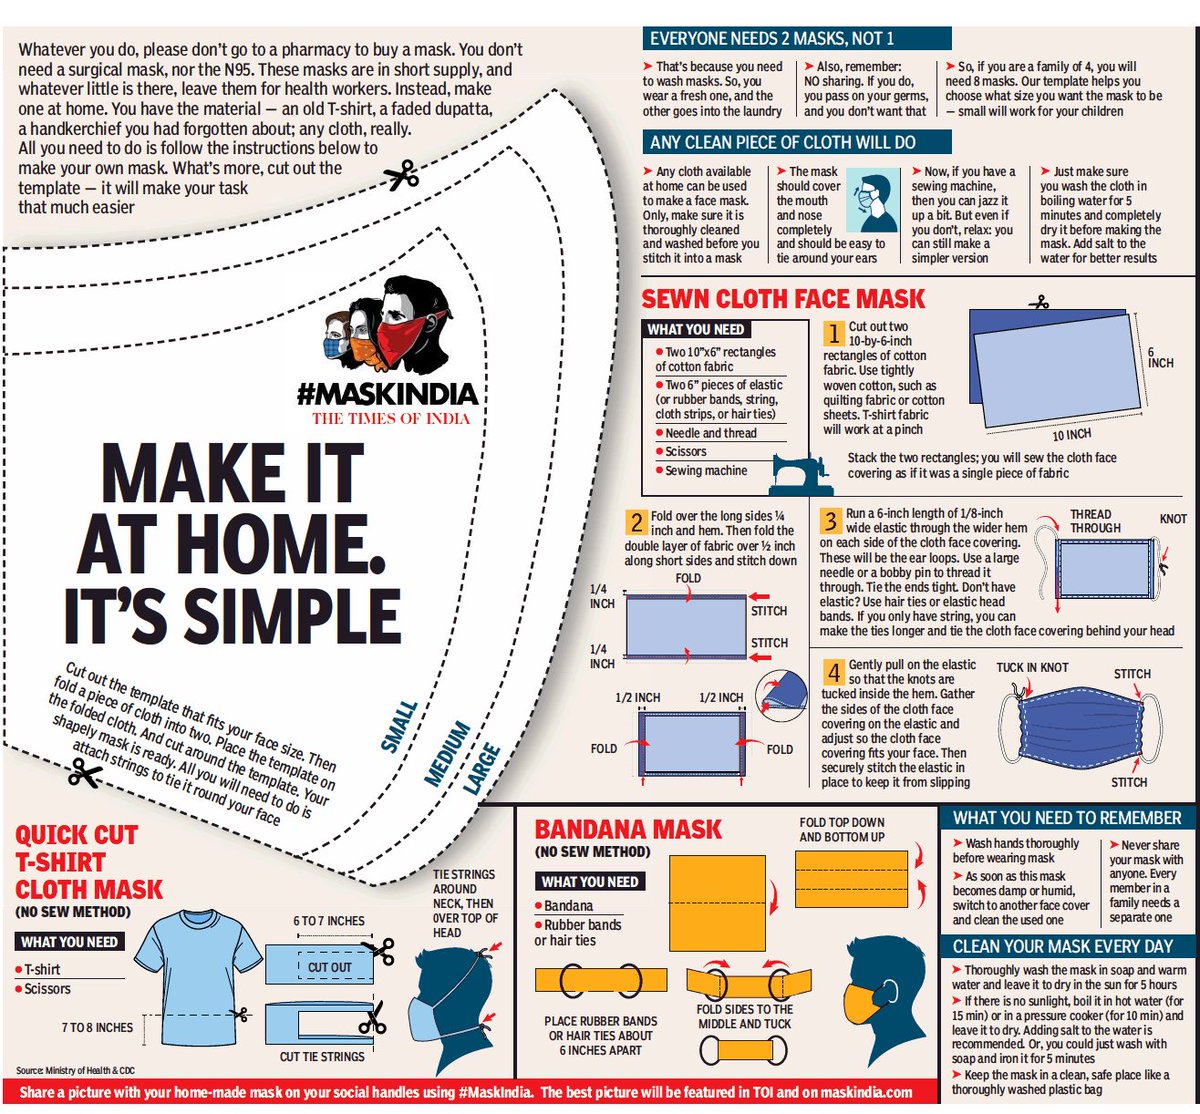 Today’s Times of India has extensive instructions on how to do it properly, and you can read them and see instructional videos at  http://www.maskindia.com  5/7